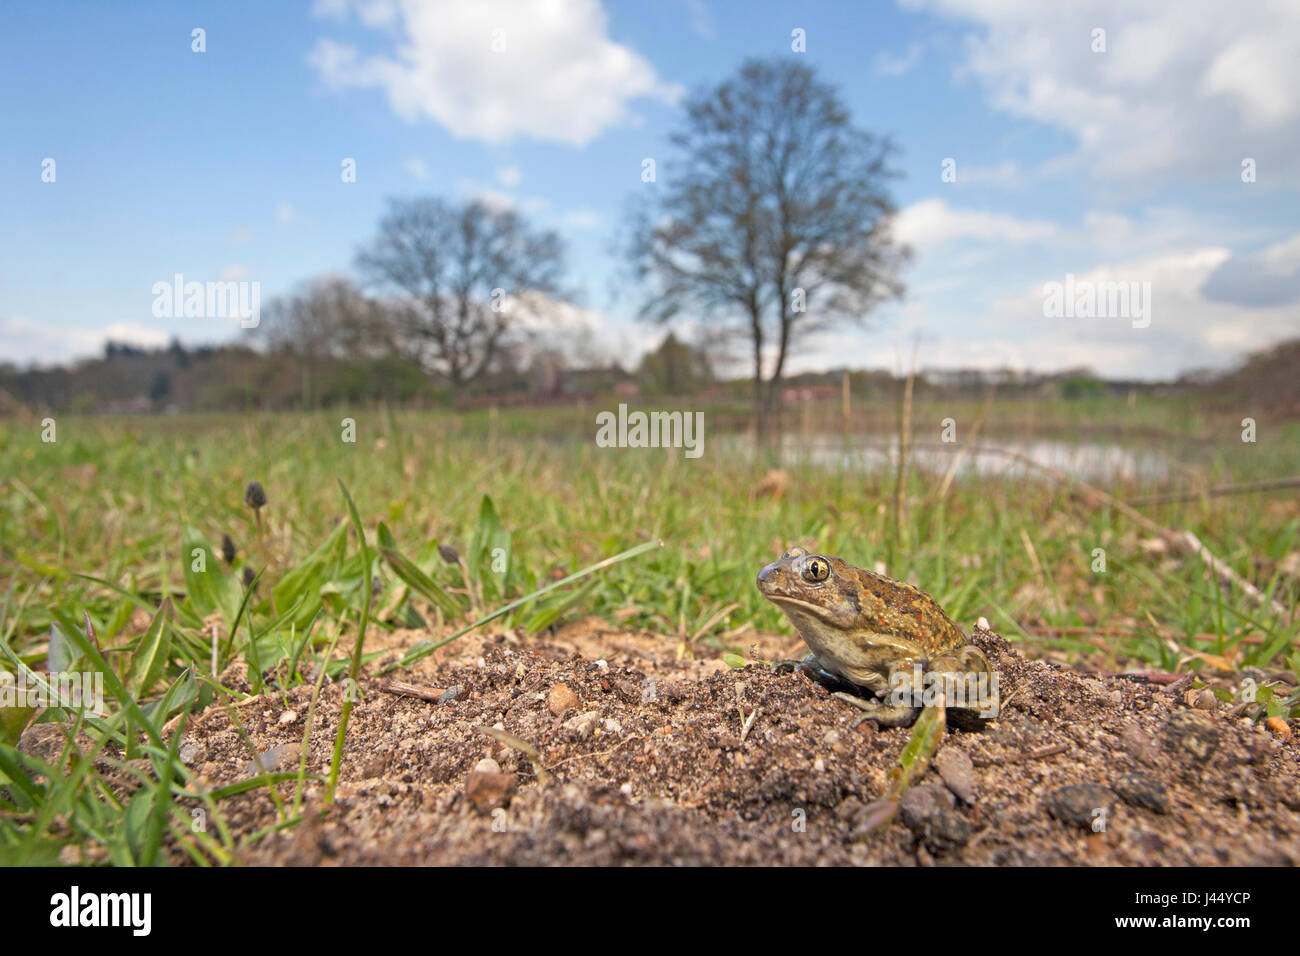 photo of a common spadefoot toad in its habitat Stock Photo